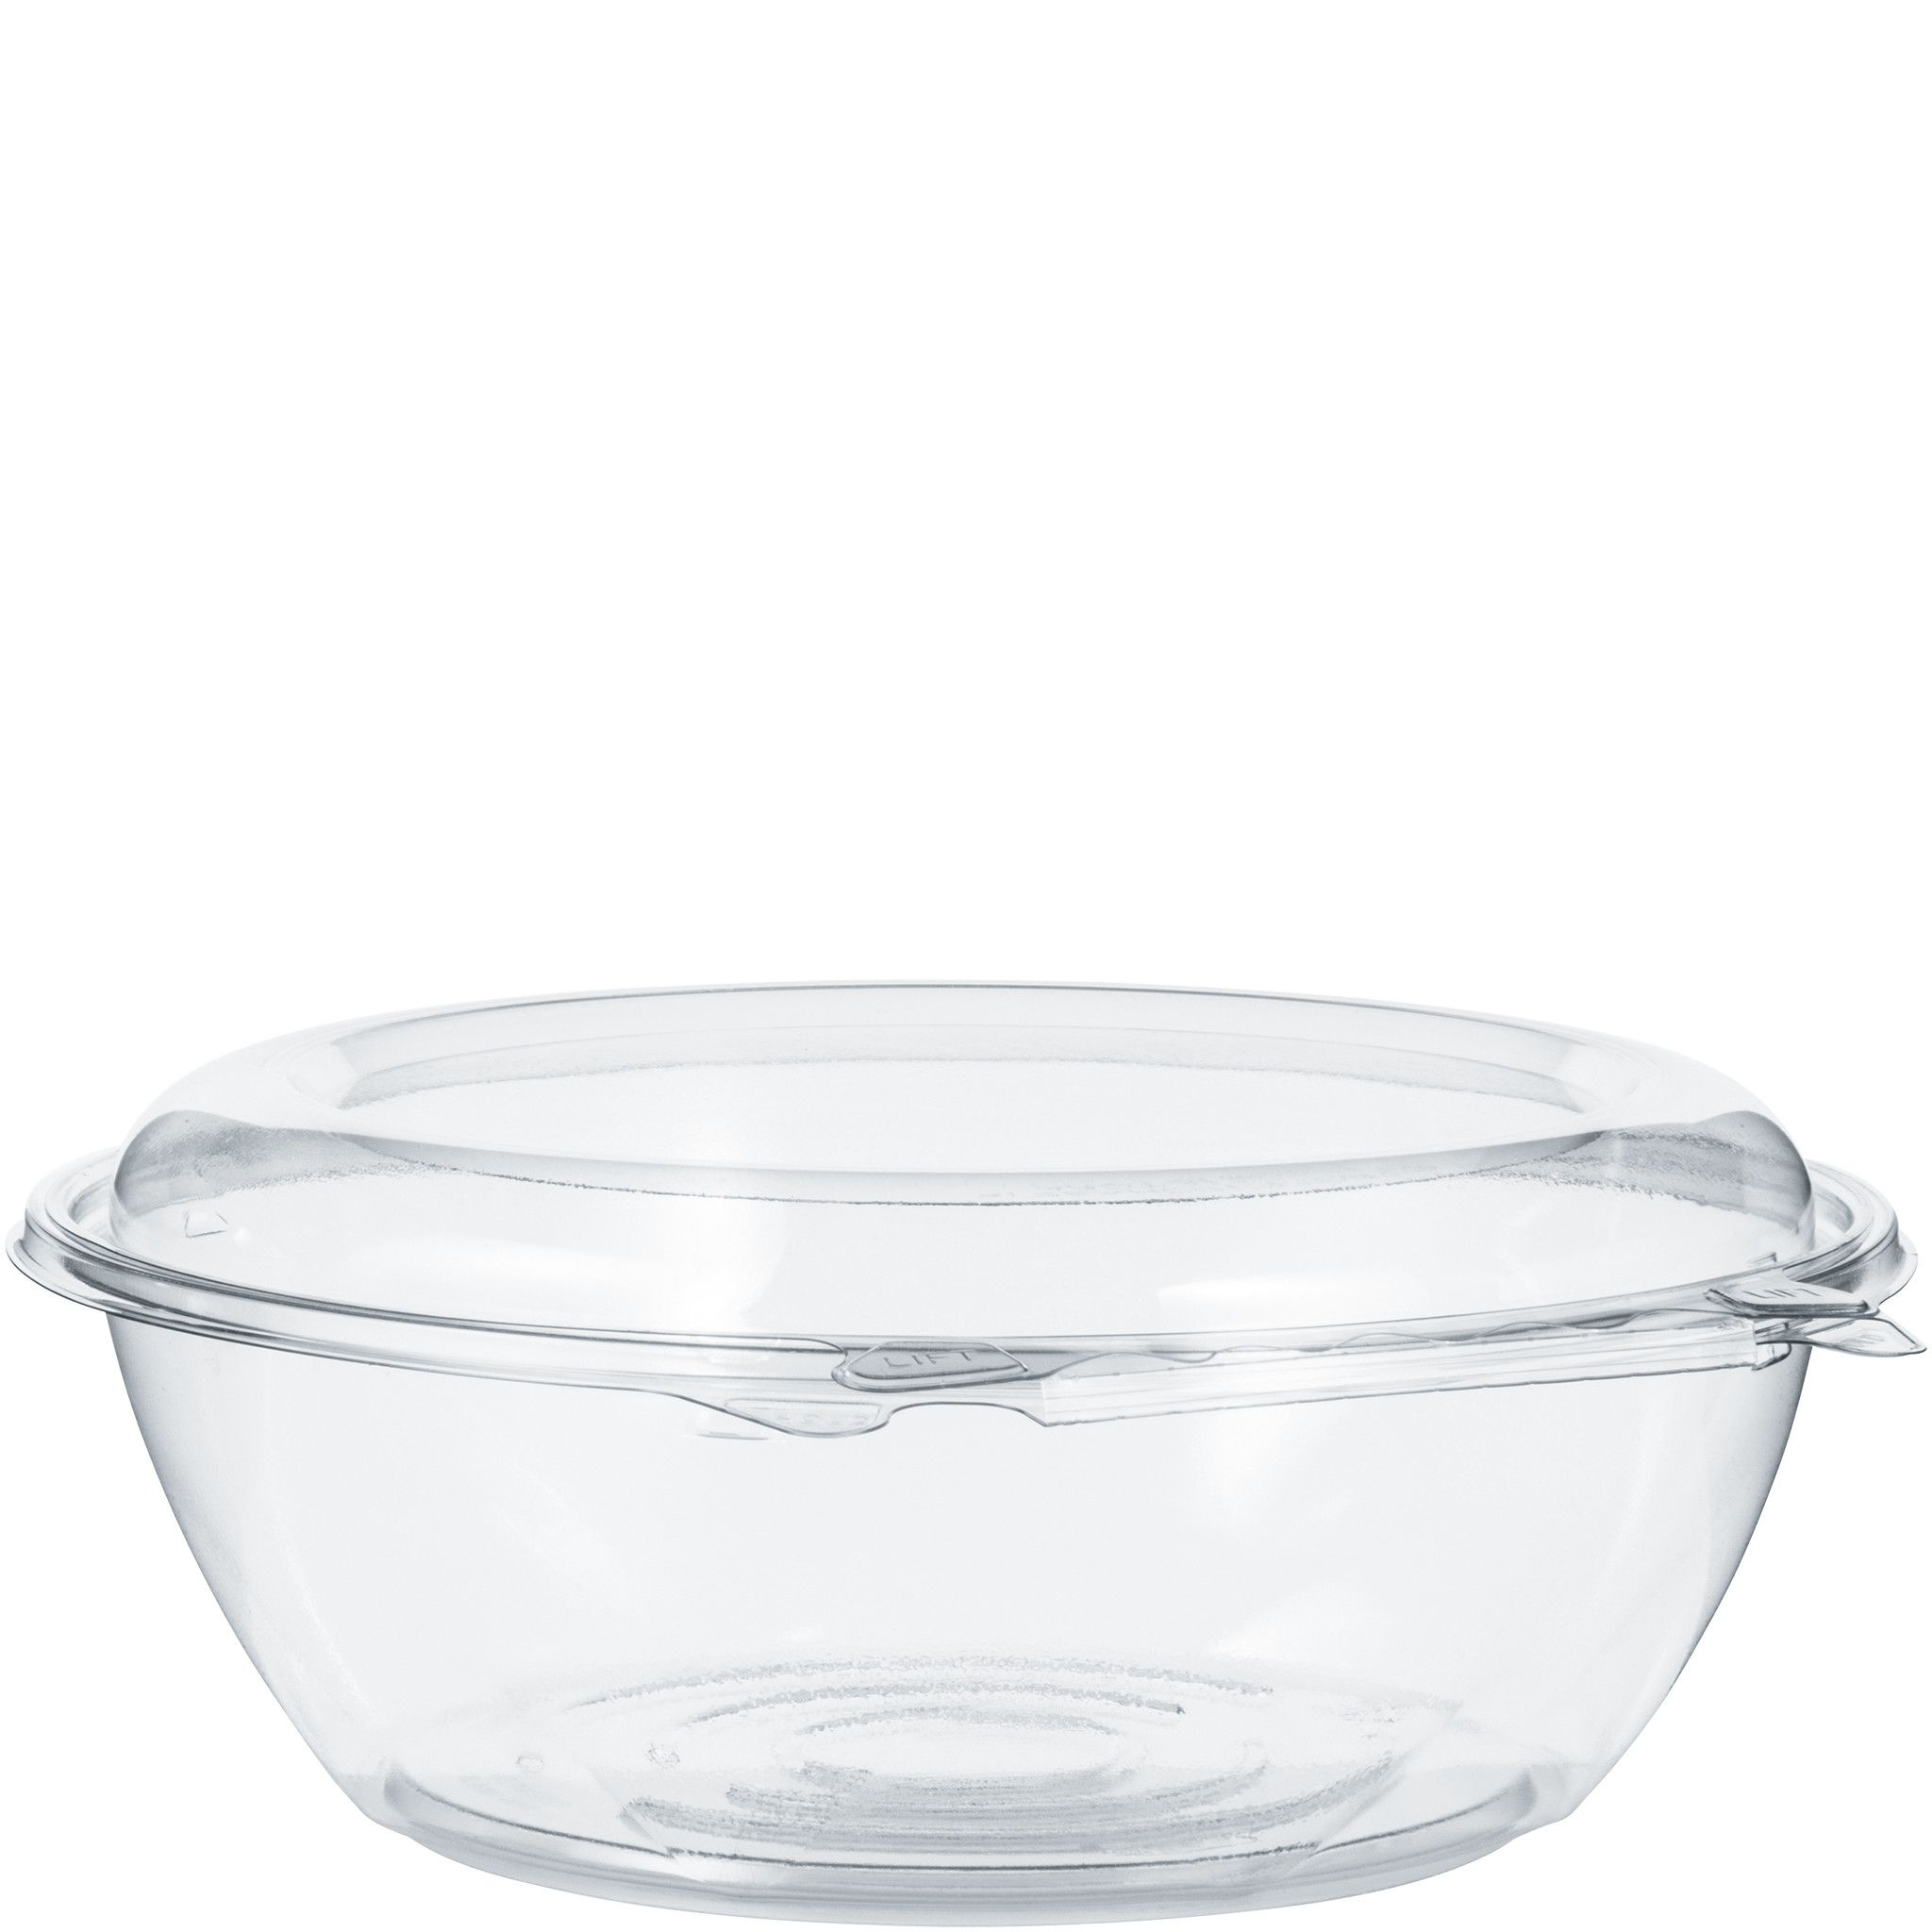 48 OZ SAFESEAL BOWL WITH DOME LID 100/CASE